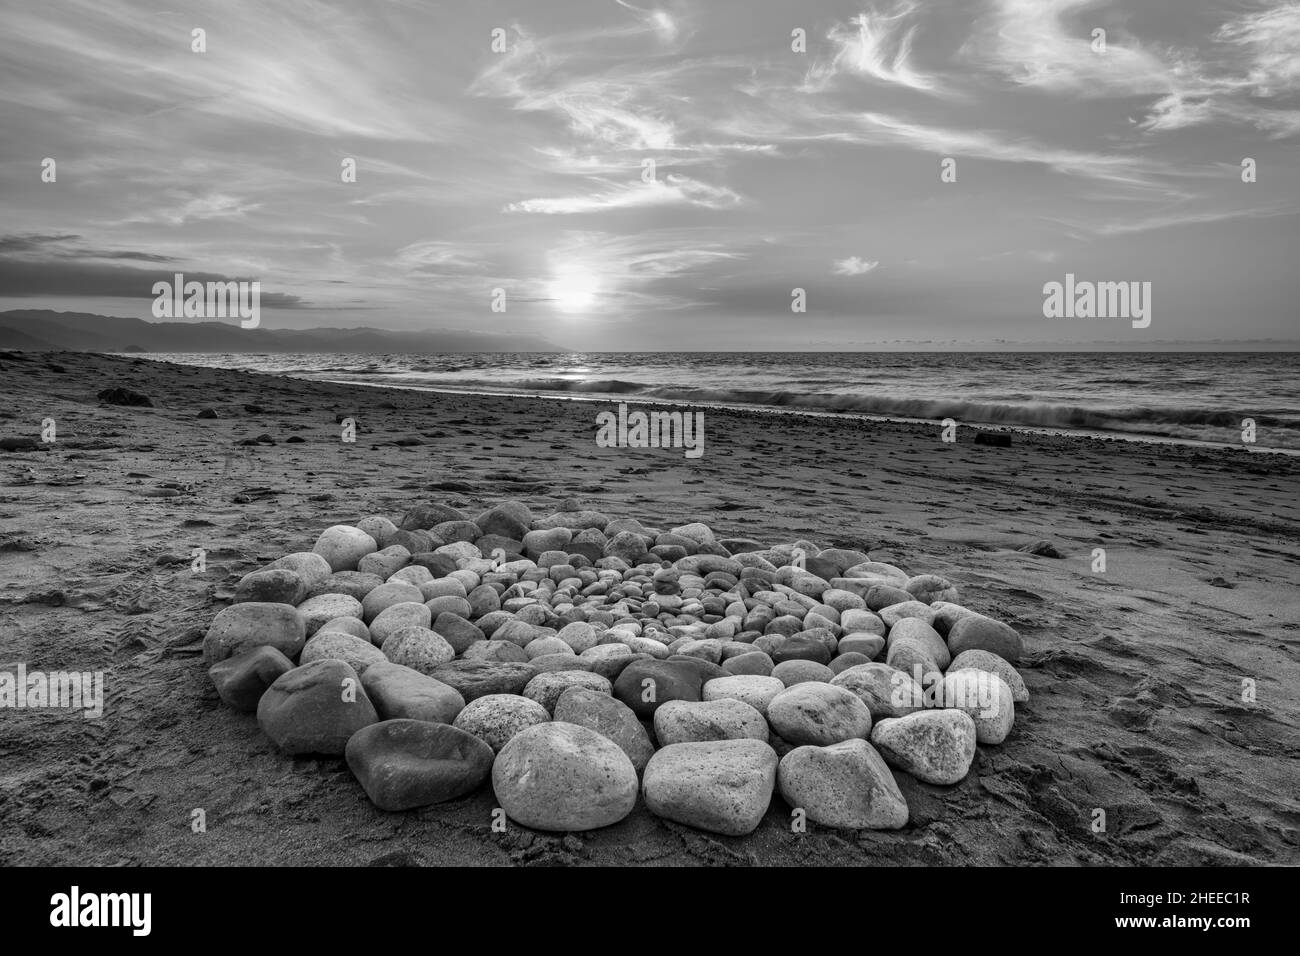 High Resolution Image Of Ritual Ceremonial Stones In Black And White Image Format Stock Photo